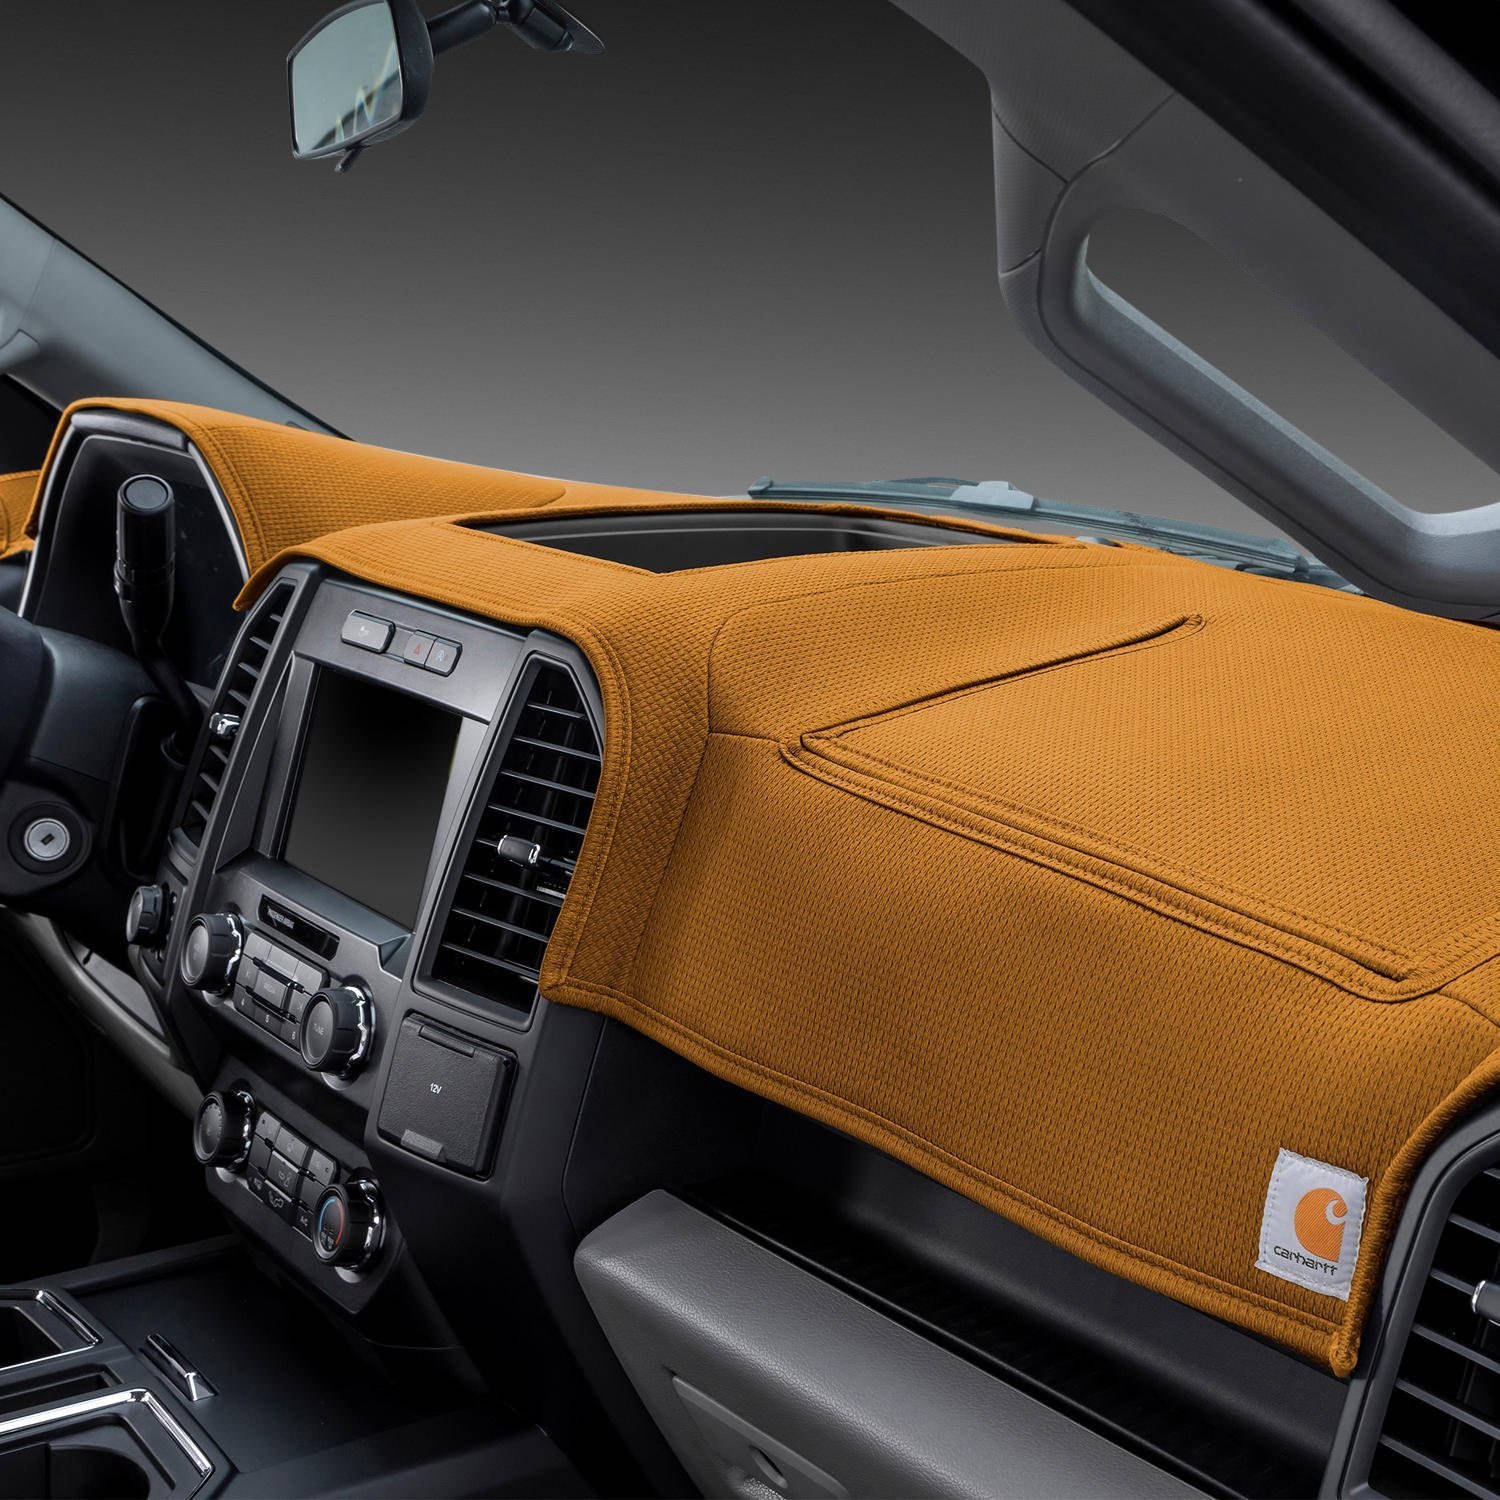 Car Dashboard Covers: What You Need to Know